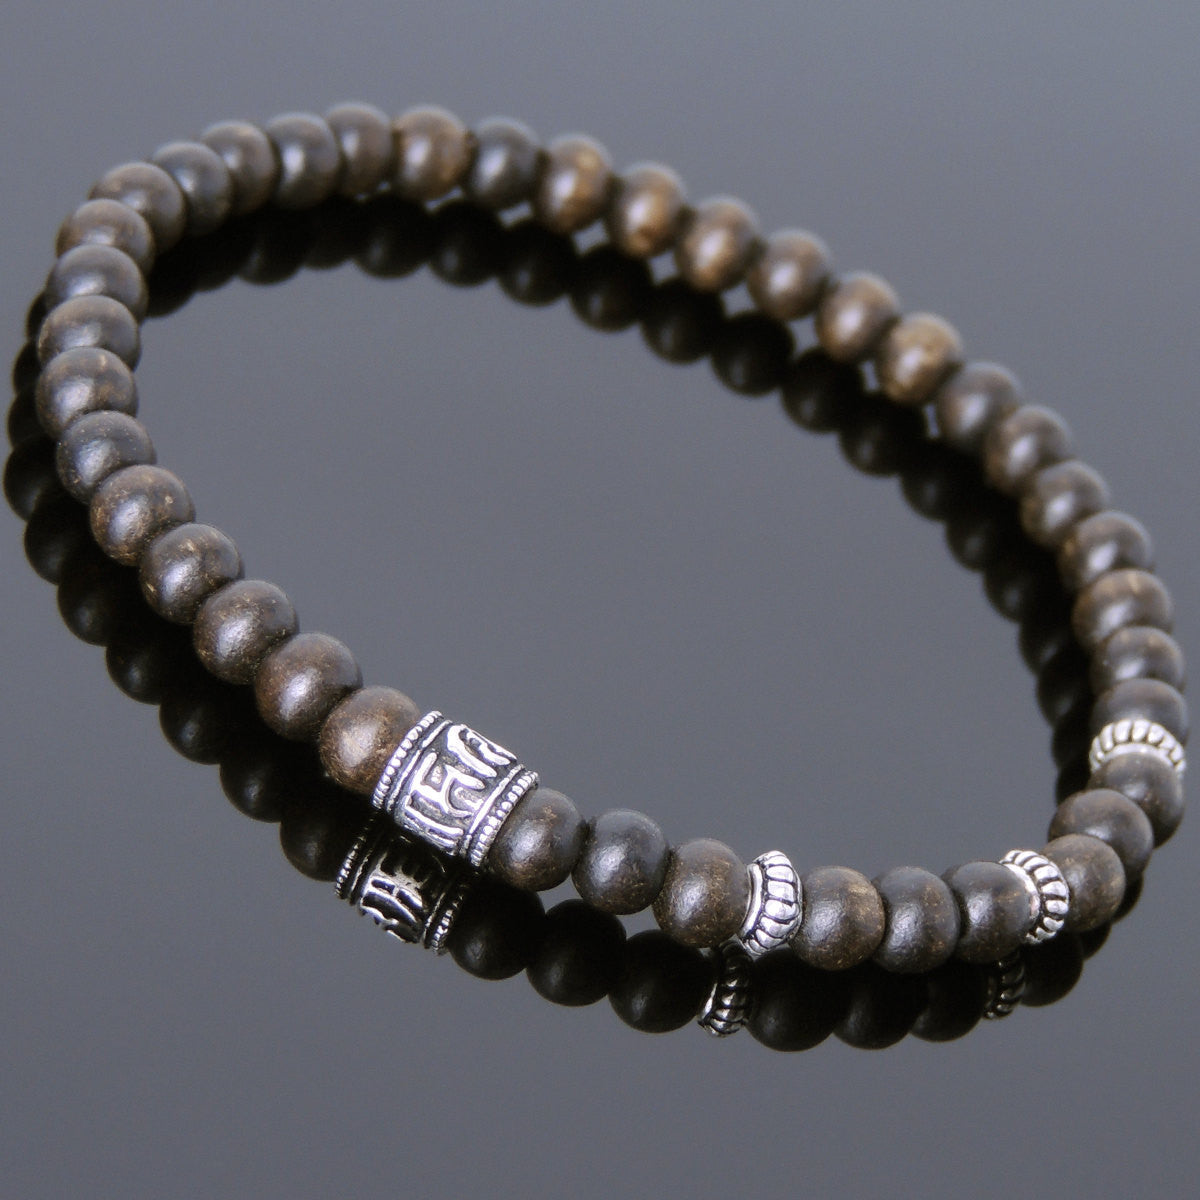 5mm Agarwood Mala Healing Bracelet with S925 Sterling Silver OM Bead & Spacers - Handmade by Gem & Silver BR218